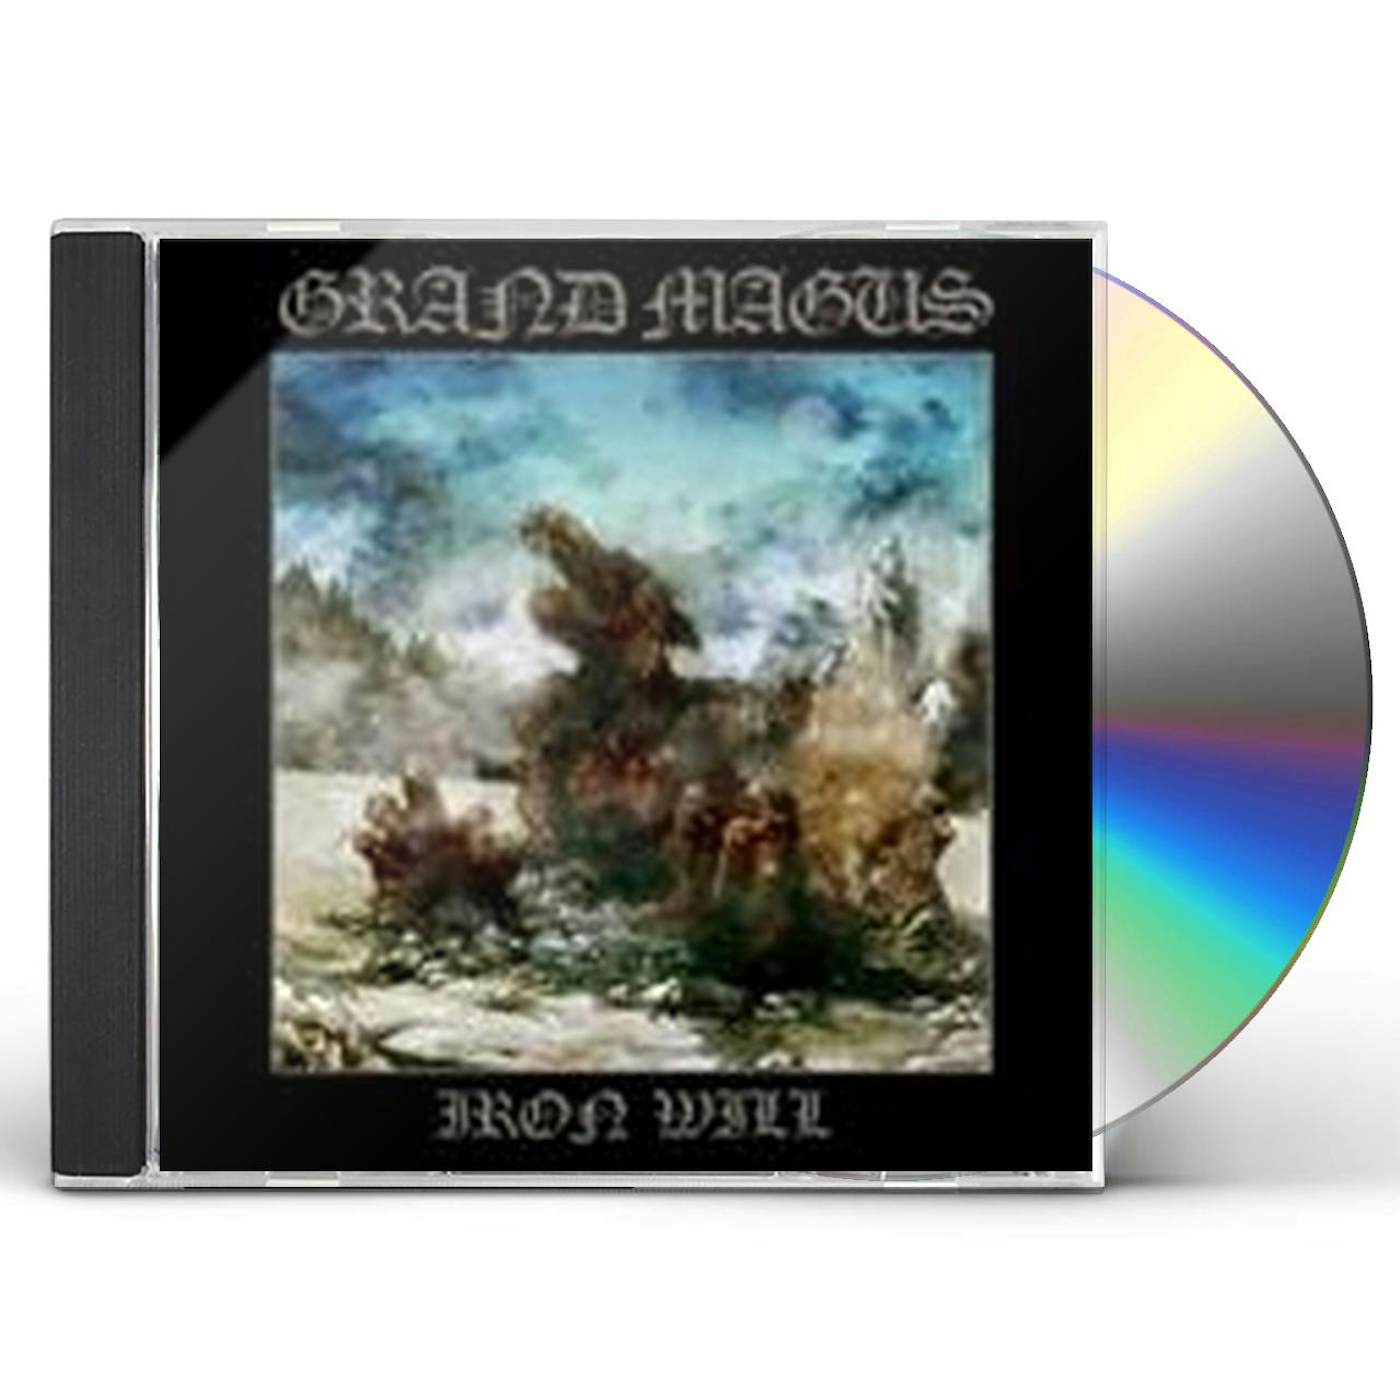 Grand Magus IRON WILL CD